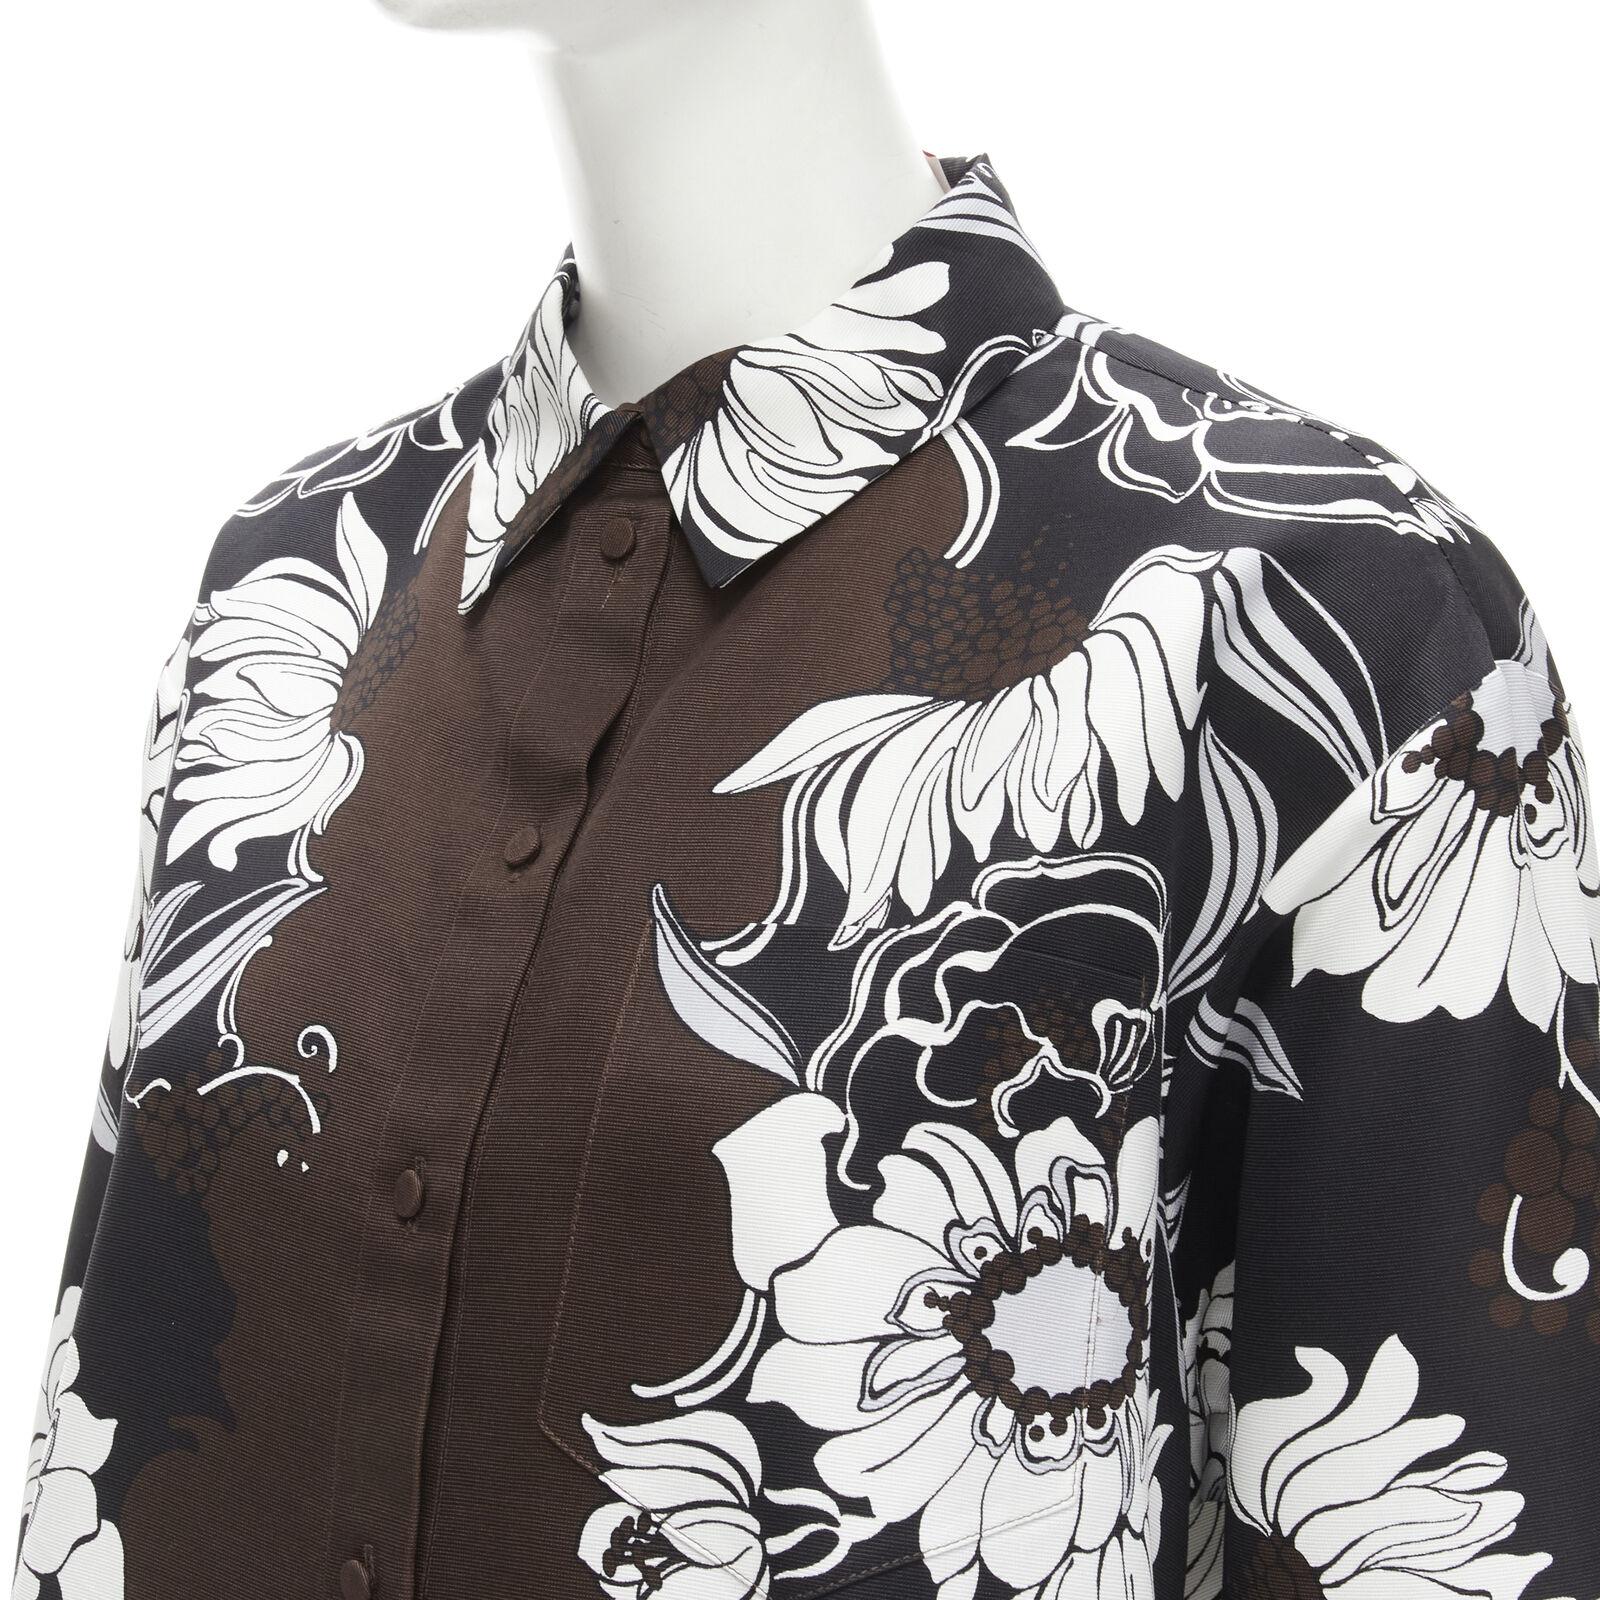 VALENTINO 2021 Runway brown oversized floral cotton silk faille shirt dress IT36
Reference: AAWC/A00034
Brand: Valentino
Designer: Pier Paolo Piccioli
Collection: 2022 Spring Summer - Runway
Material: Cotton, Silk
Color: Brown, White
Pattern: